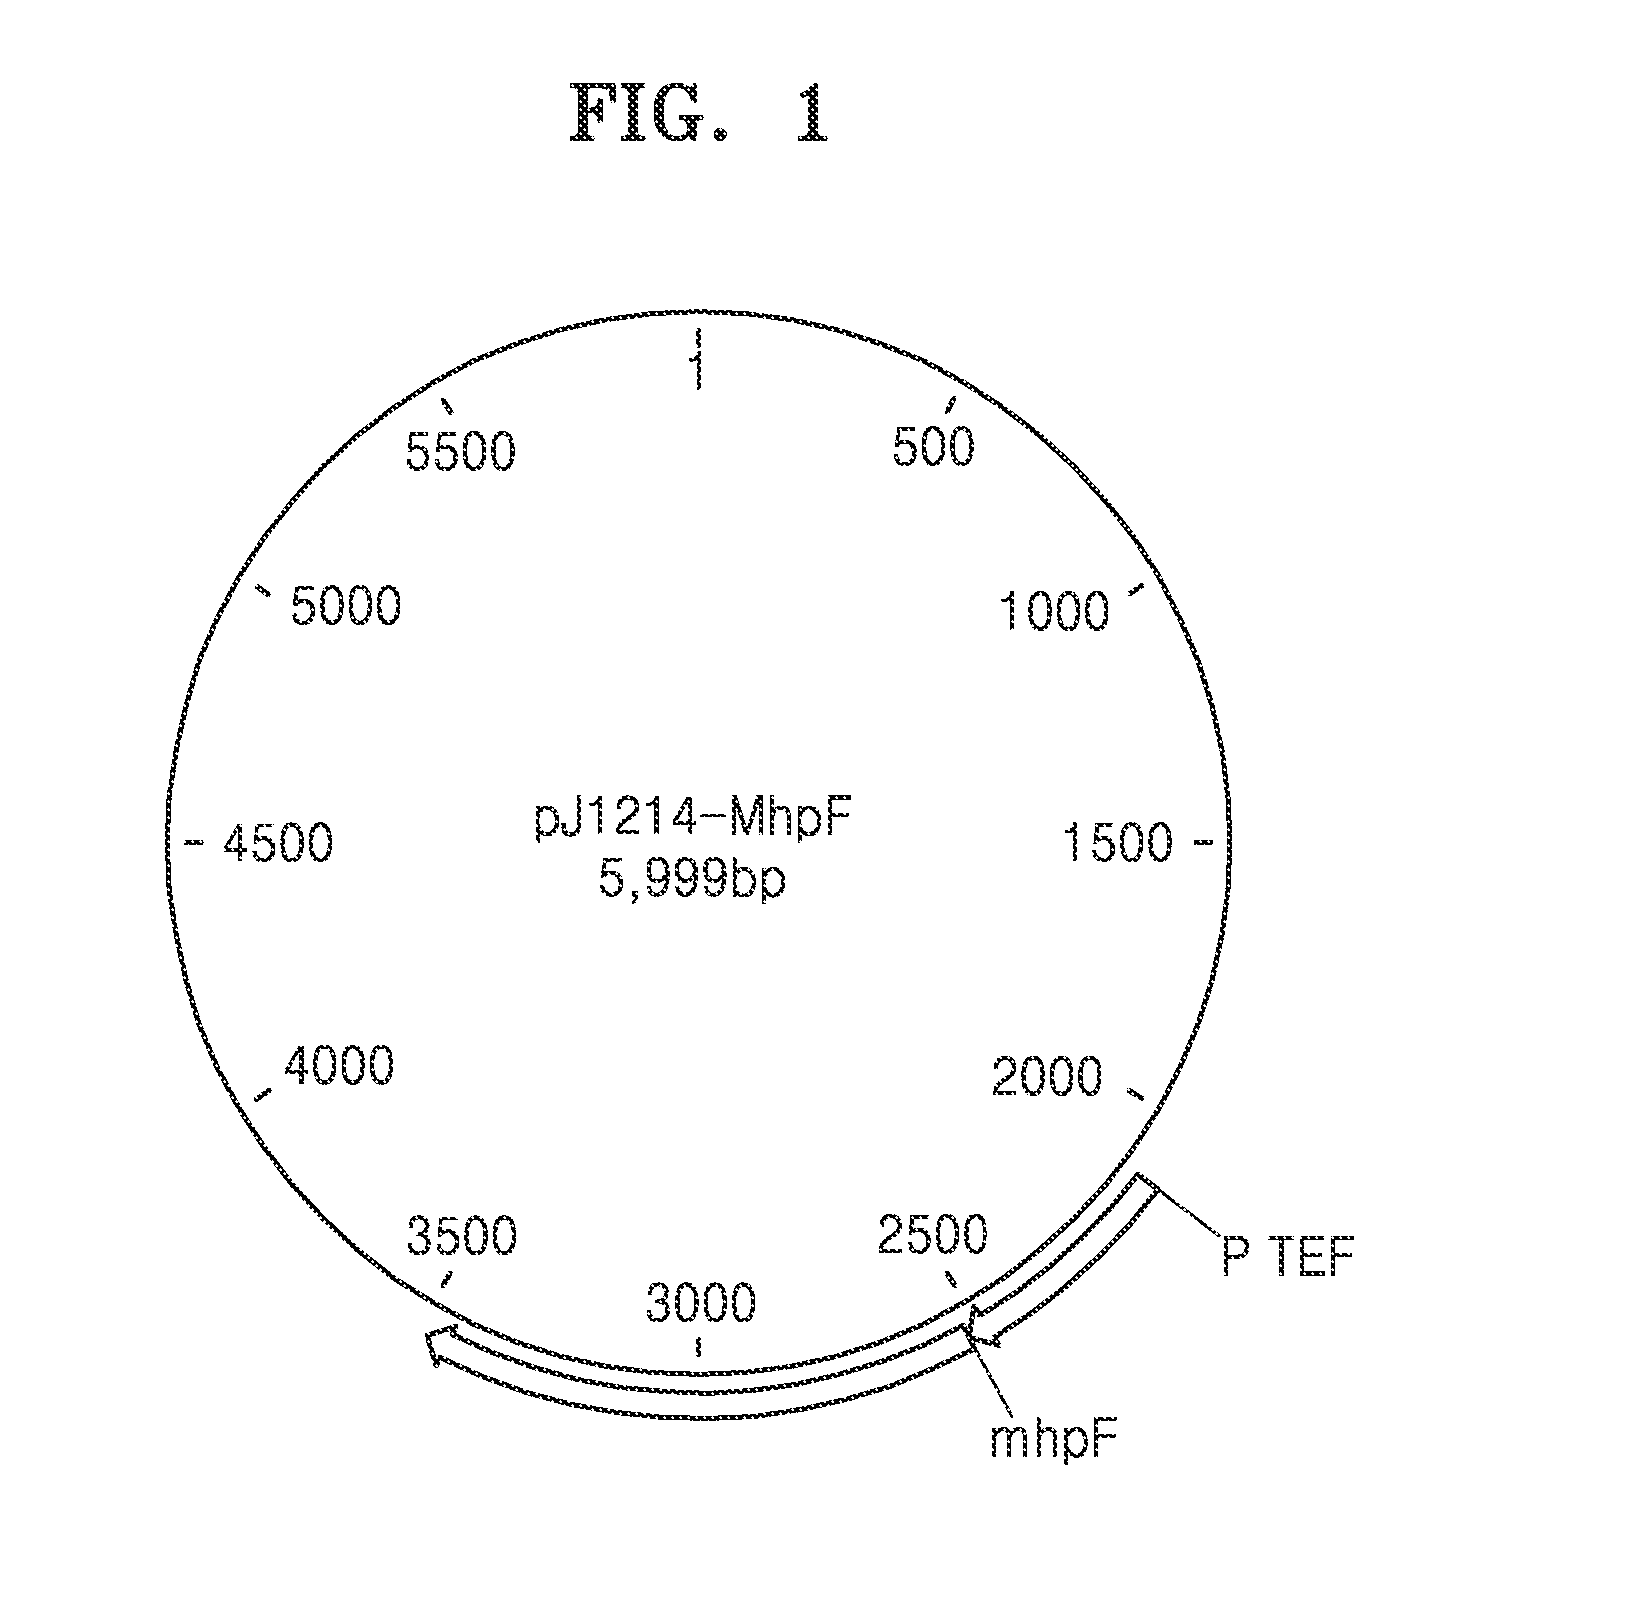 Genetically engineered yeast cell producing lactate including acetaldehyde dehydrogenase, method of producing yeast cell, and method of producing lactate using the same